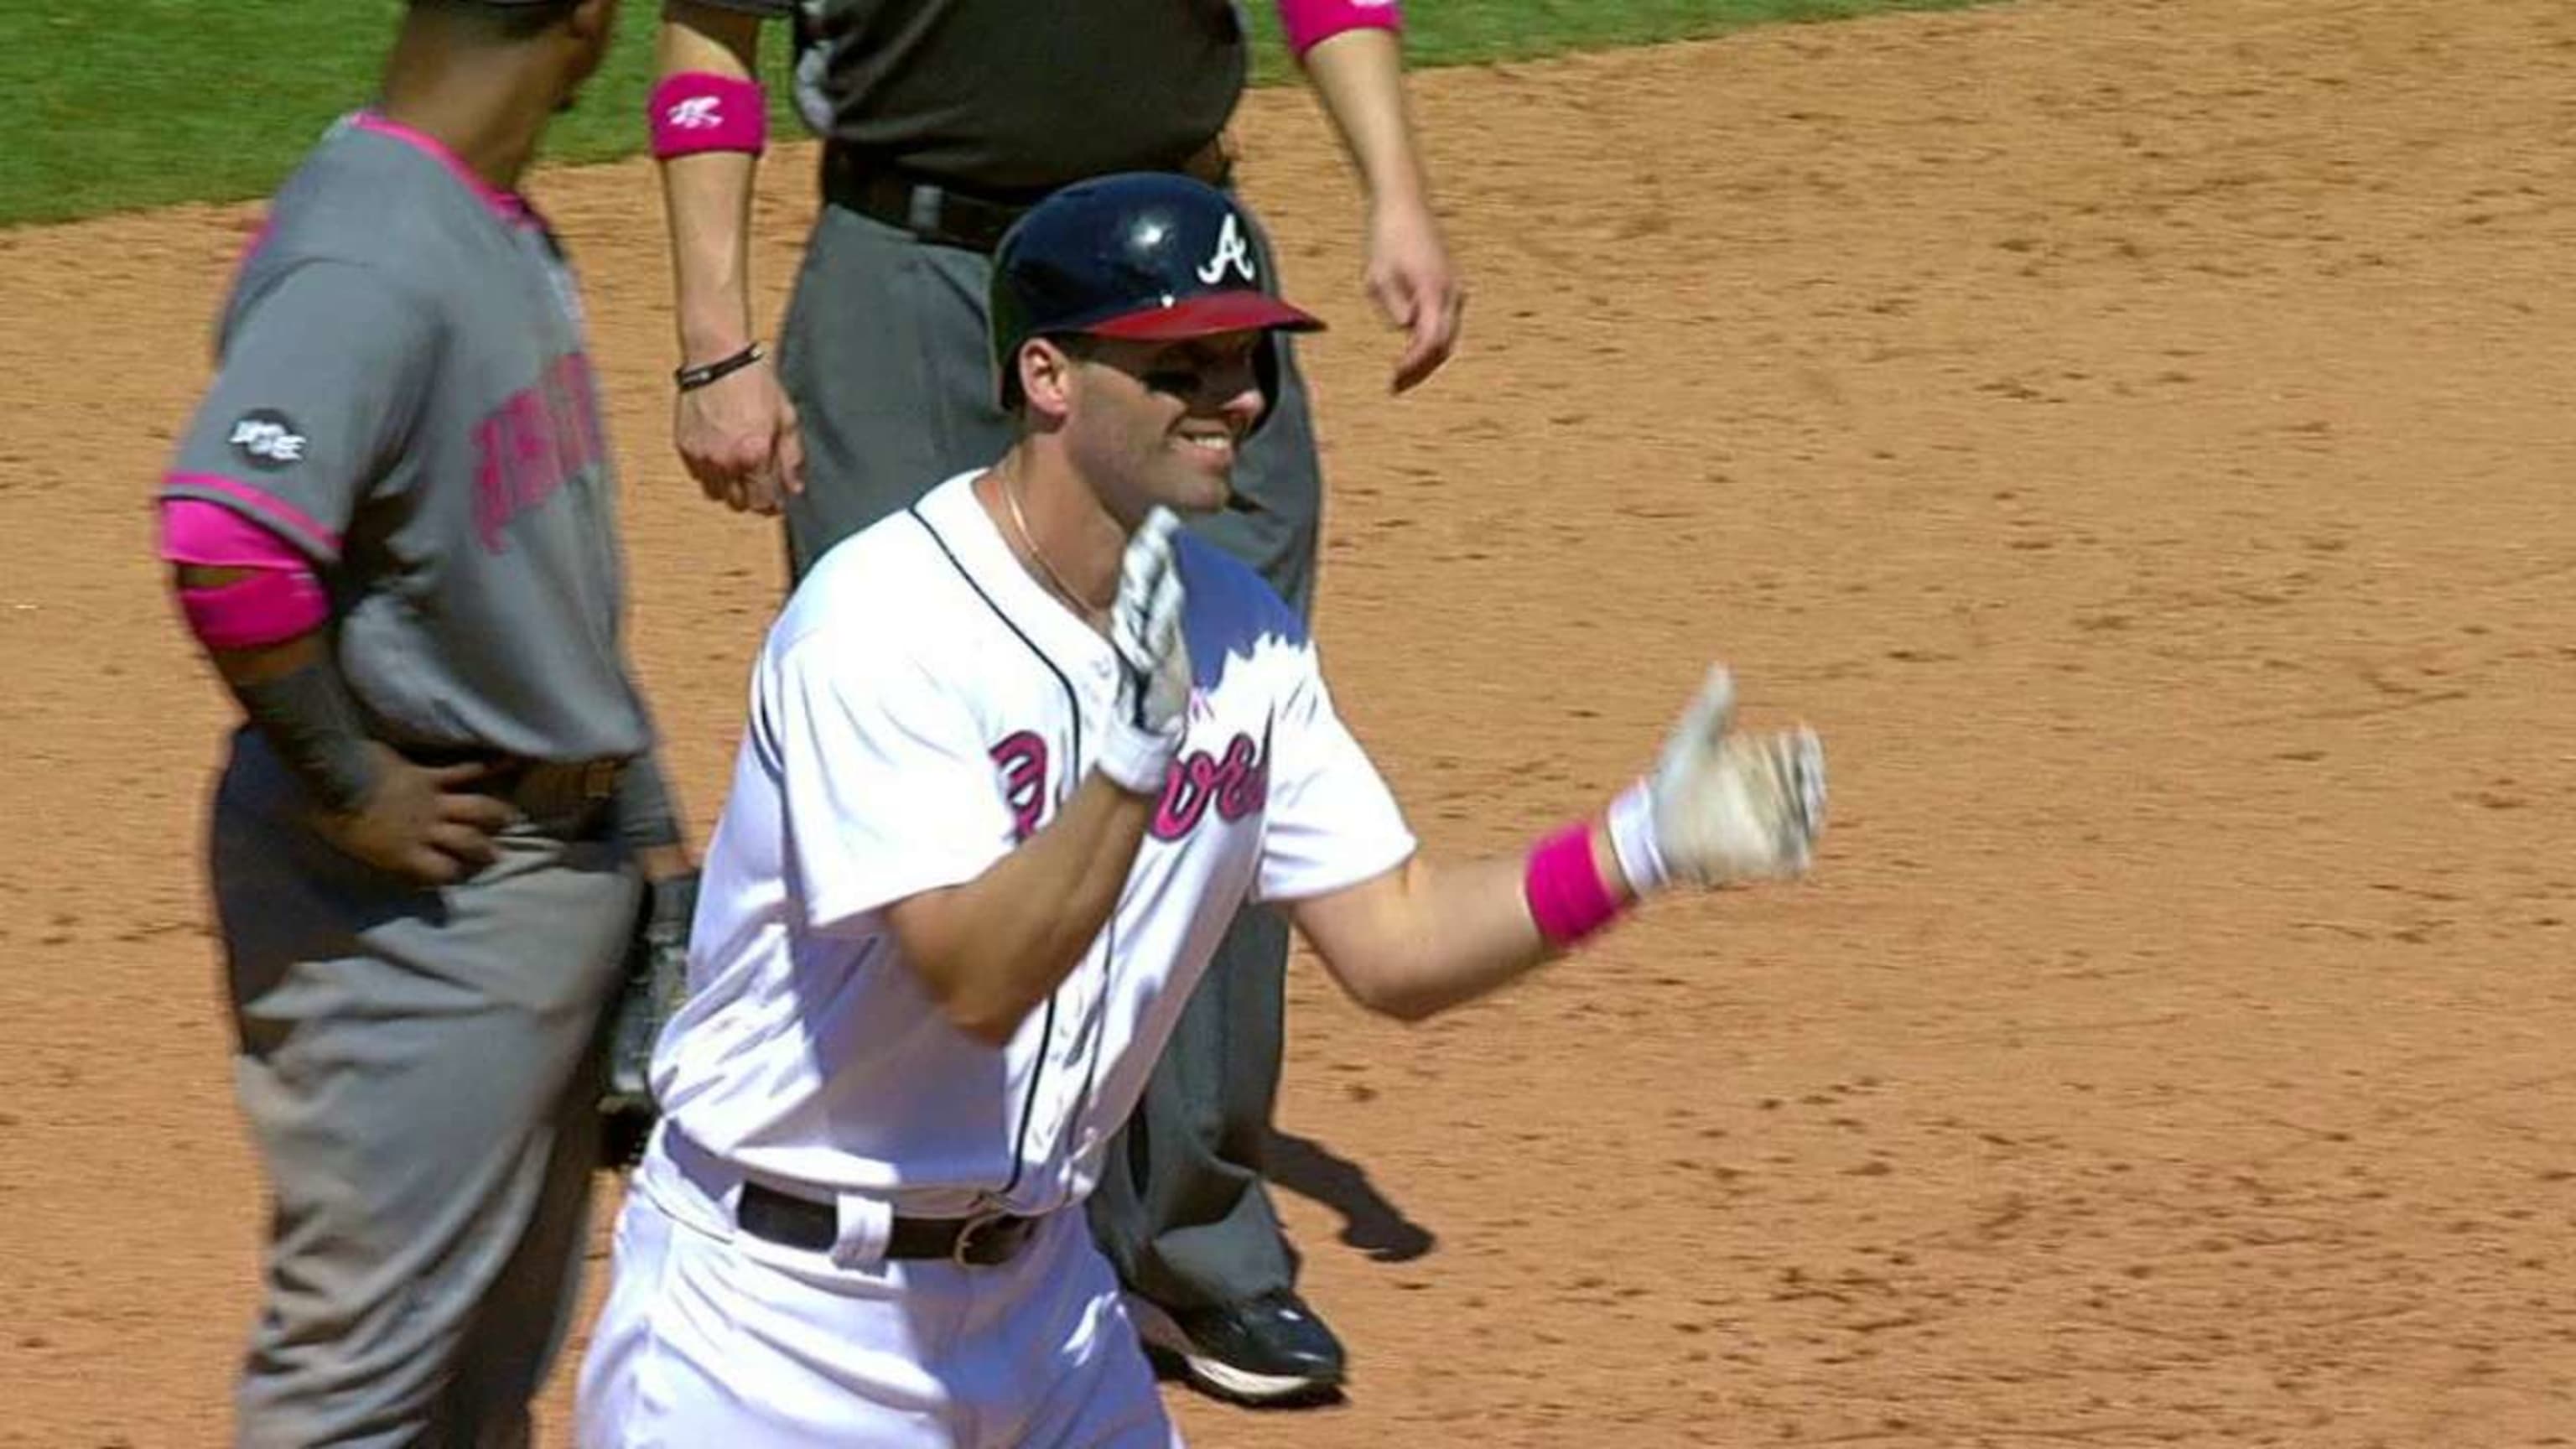 Braves wear pink, gain perspective